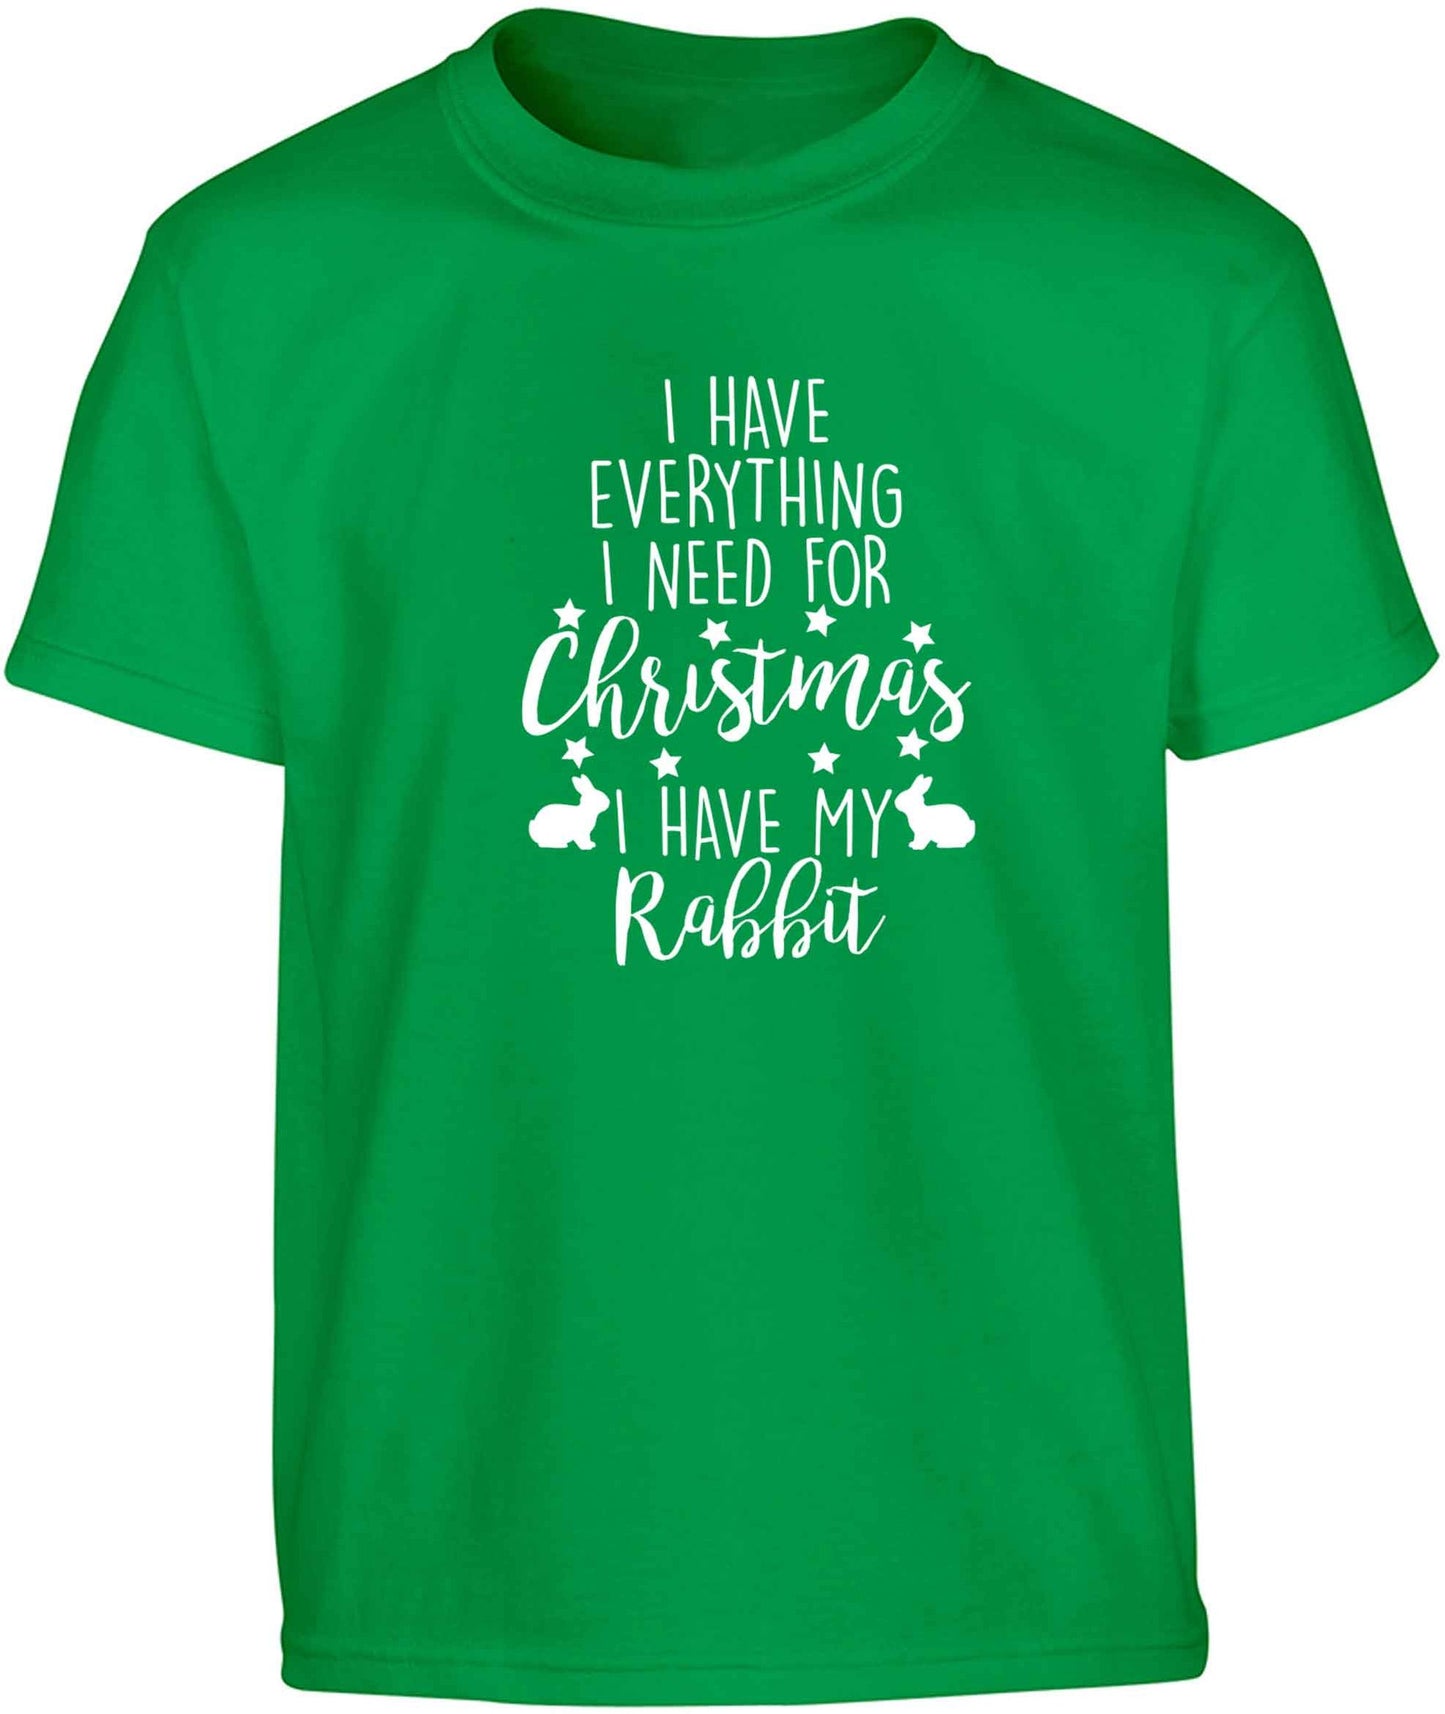 I have everything I need for Christmas I have my rabbit Children's green Tshirt 12-13 Years